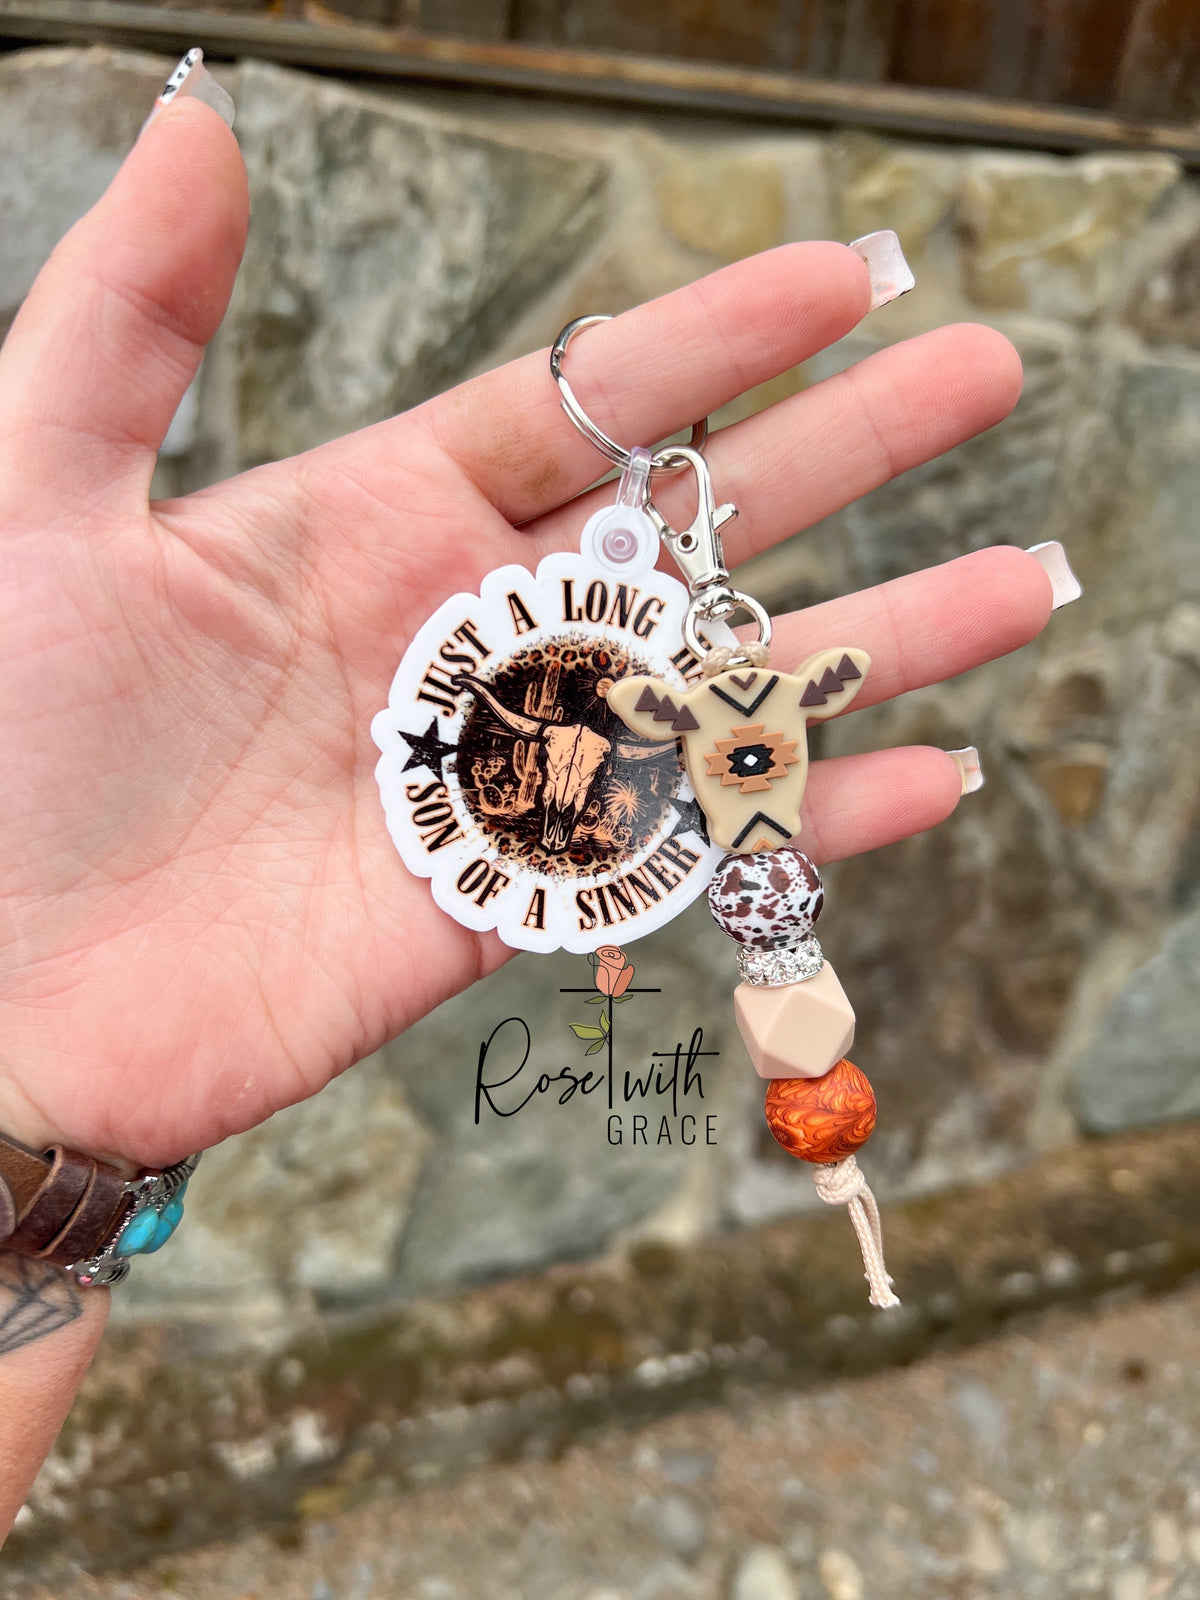 Long Haired Son of a Sinner - Mini Keychain Rose with Grace LLC